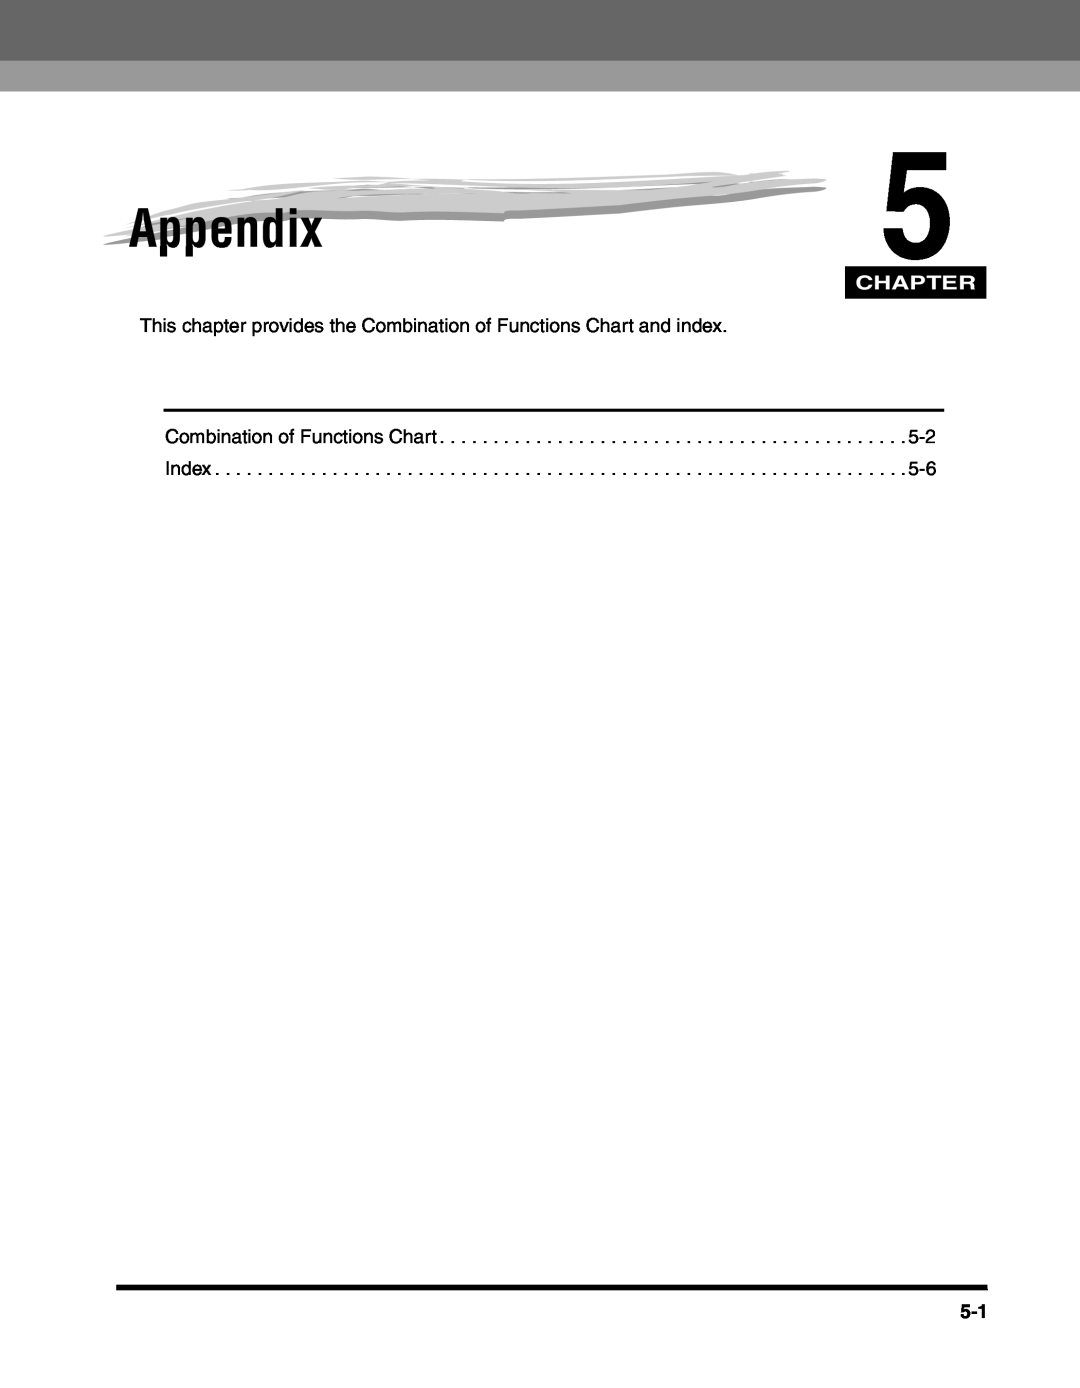 Canon 2010F manual Appendix, Chapter, This chapter provides the Combination of Functions Chart and index 